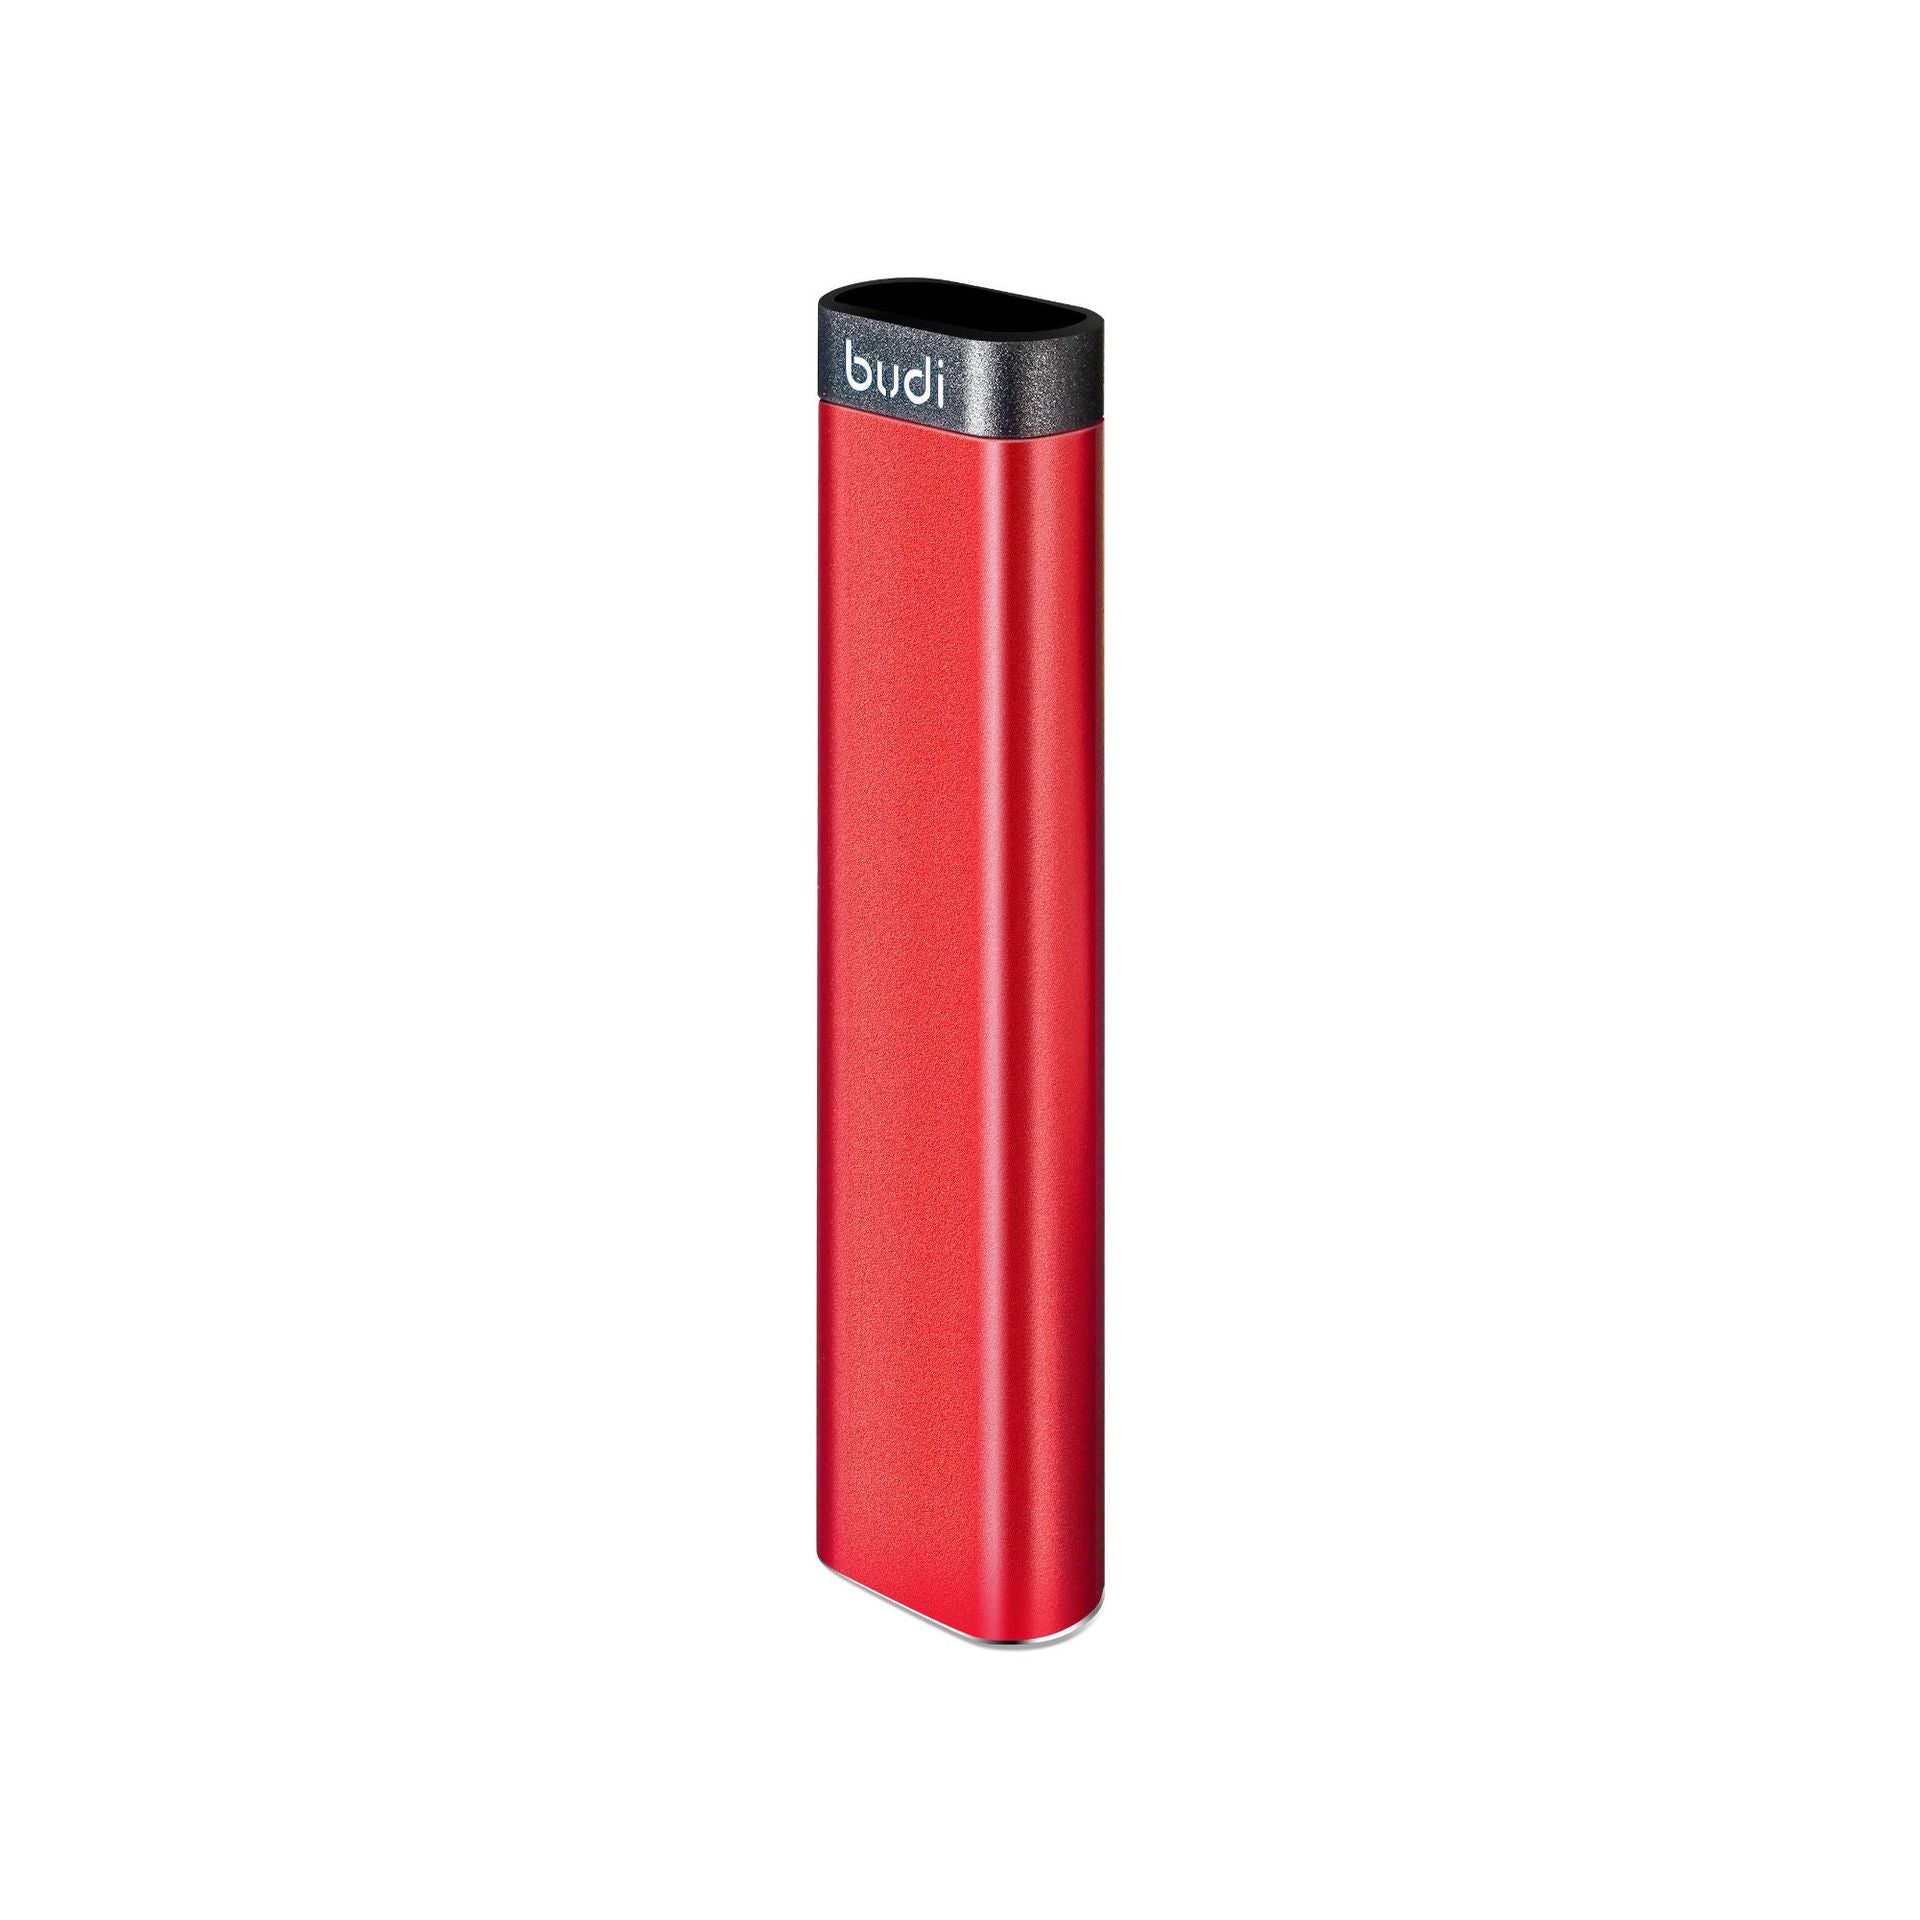 BUDI 9-in-1 Smart Adapter Card Storage color red